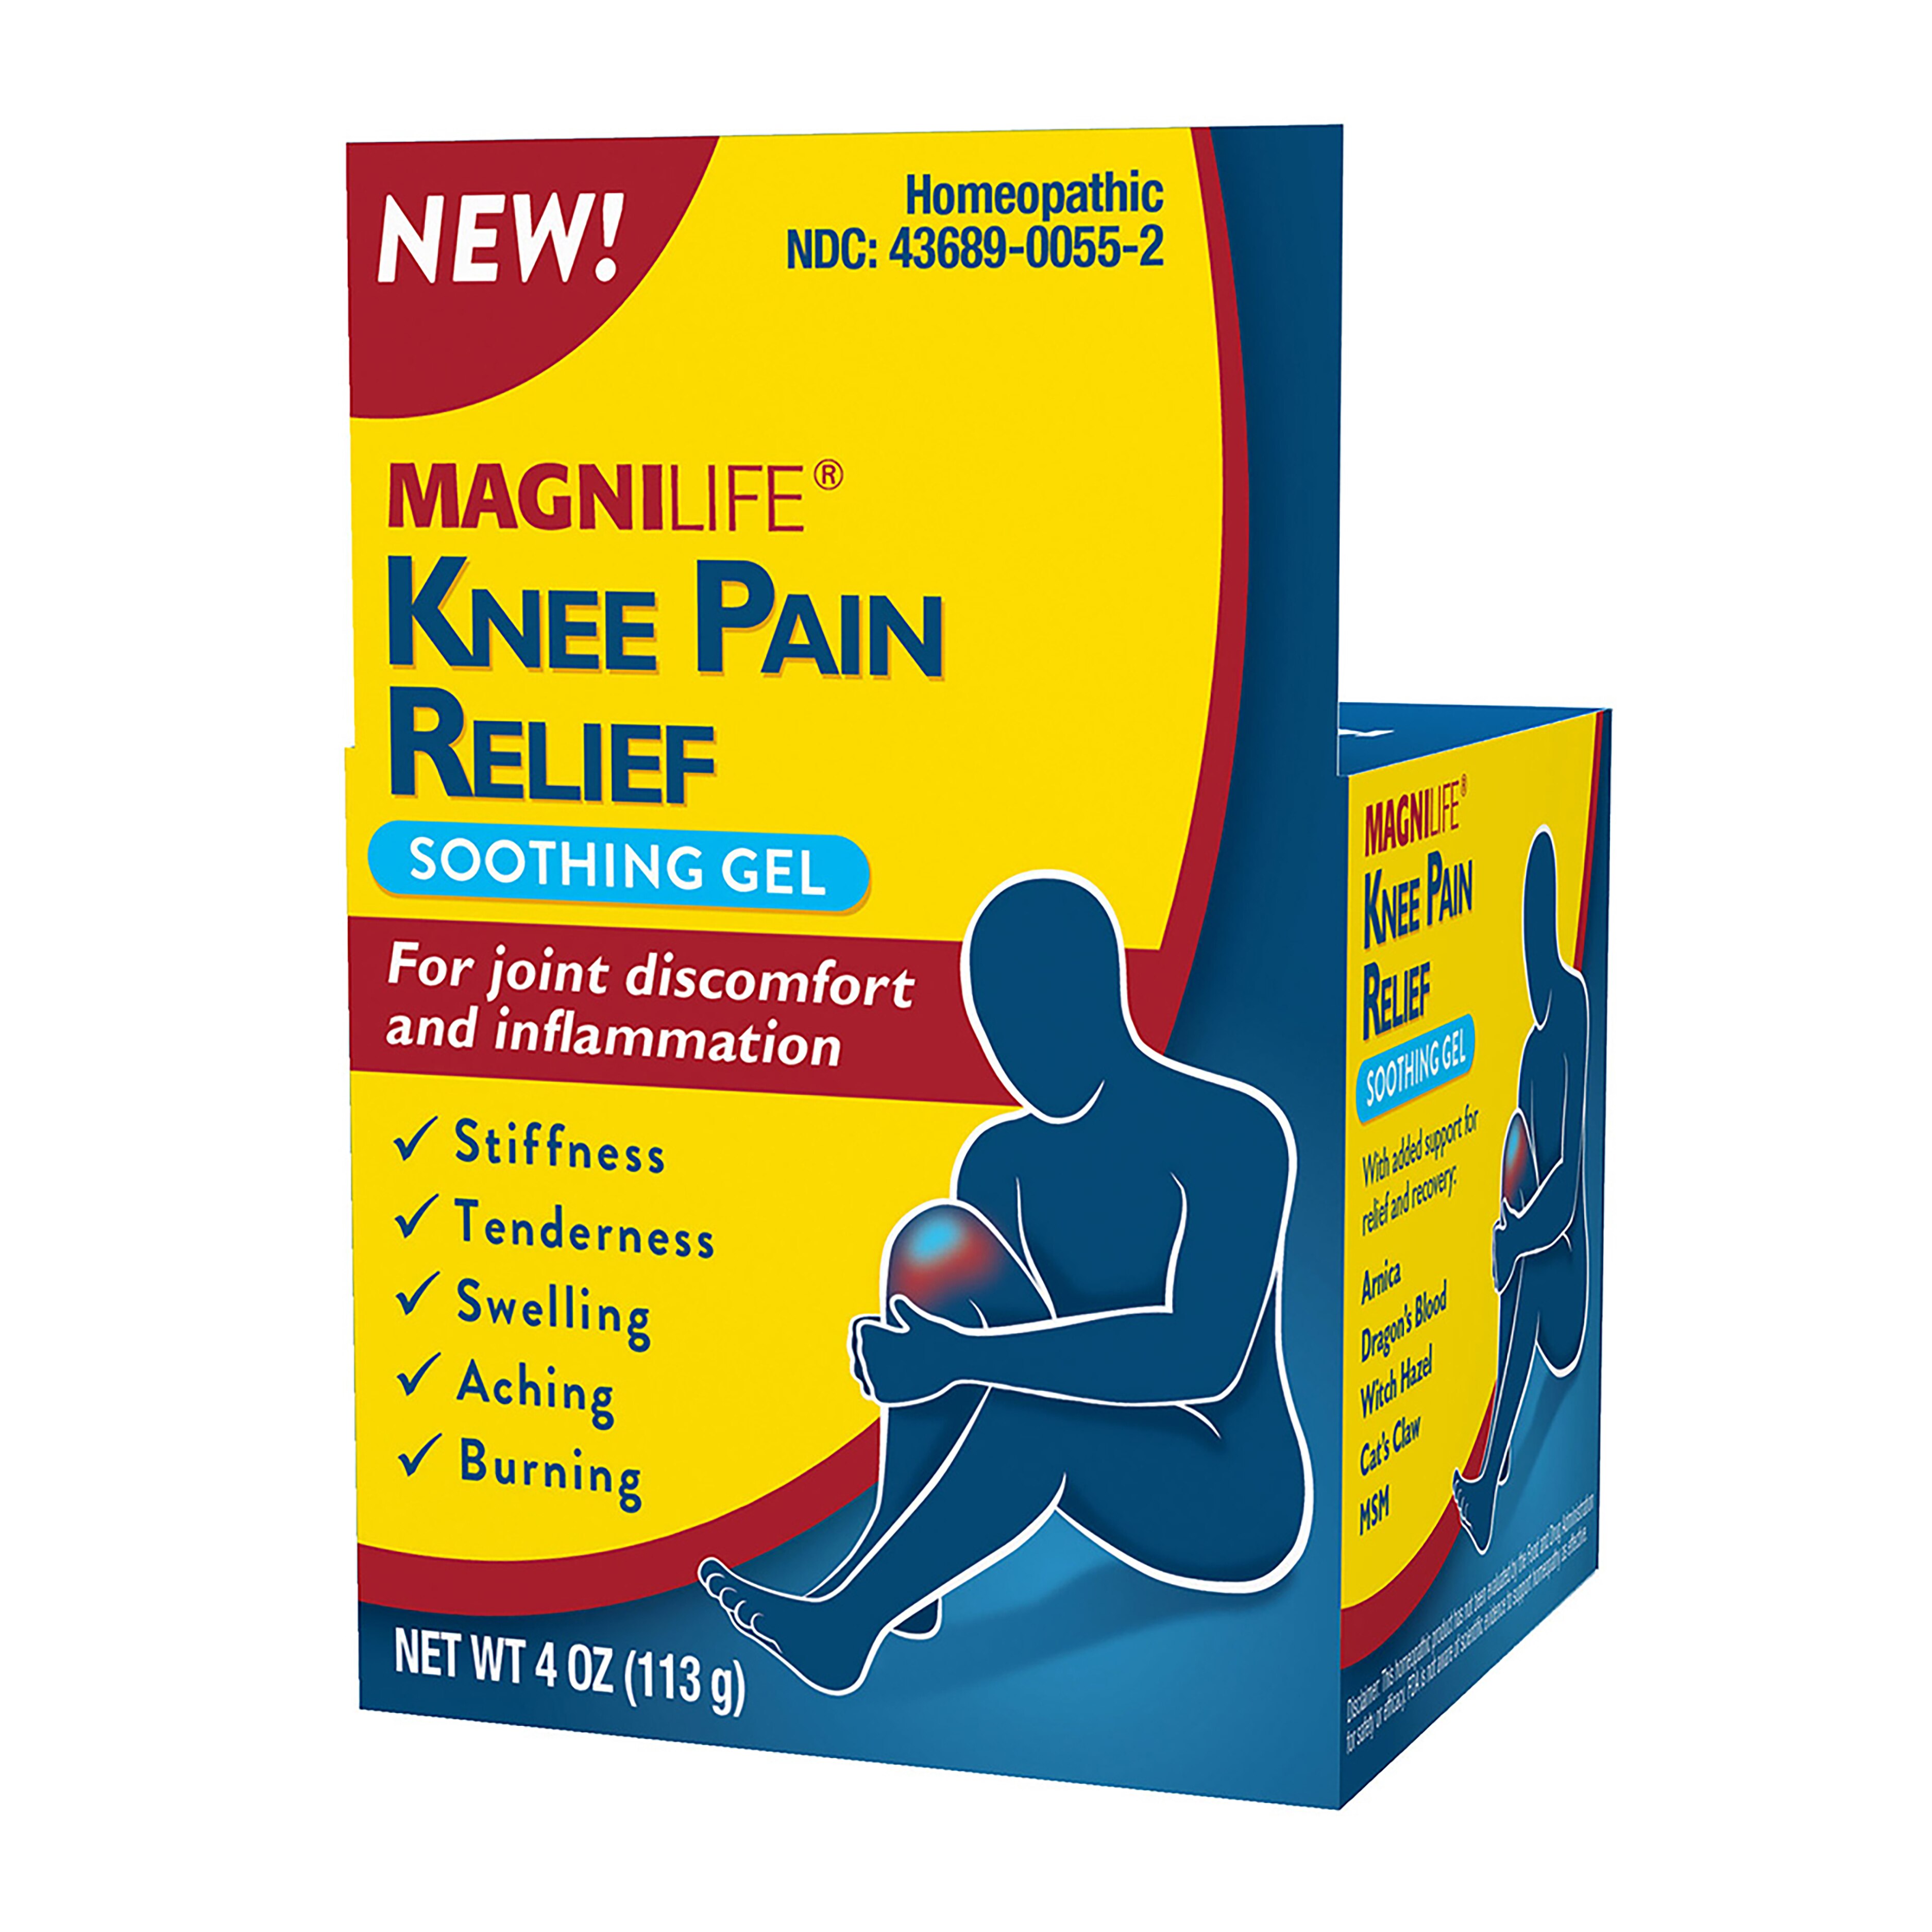 MagniLife Knee Pain Relief Soothing Gel, 4 OZ